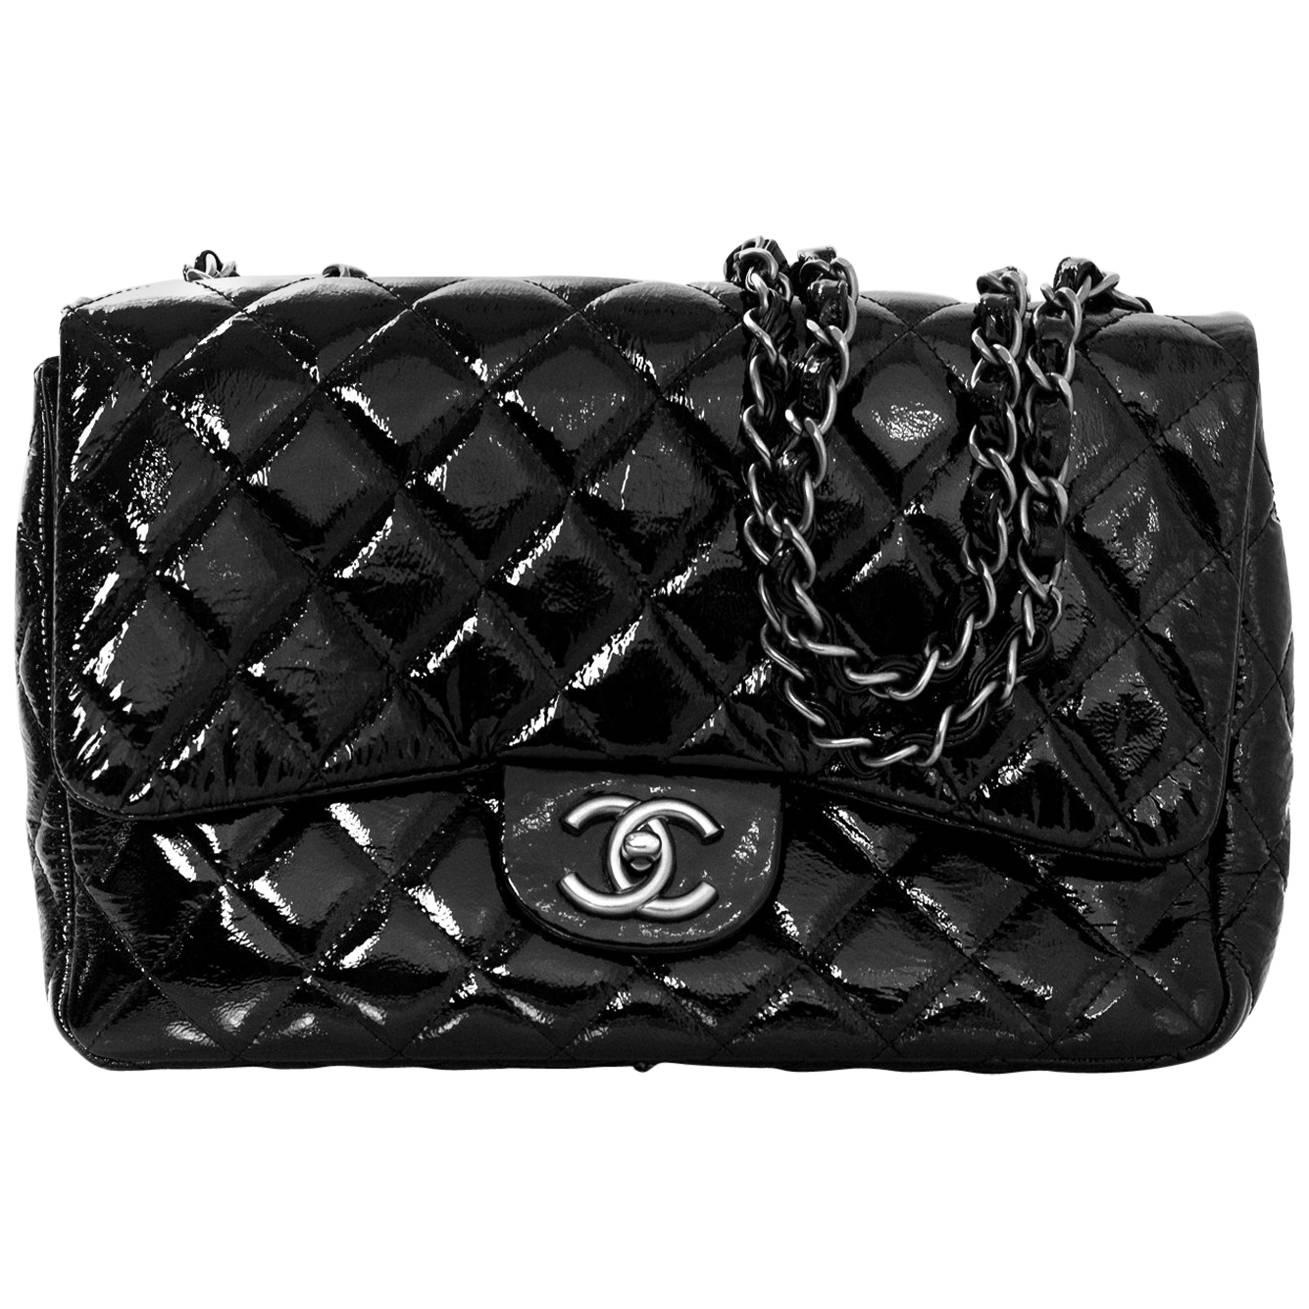 Chanel Black Patent Leather Quilted Classic Jumbo Flap Bag